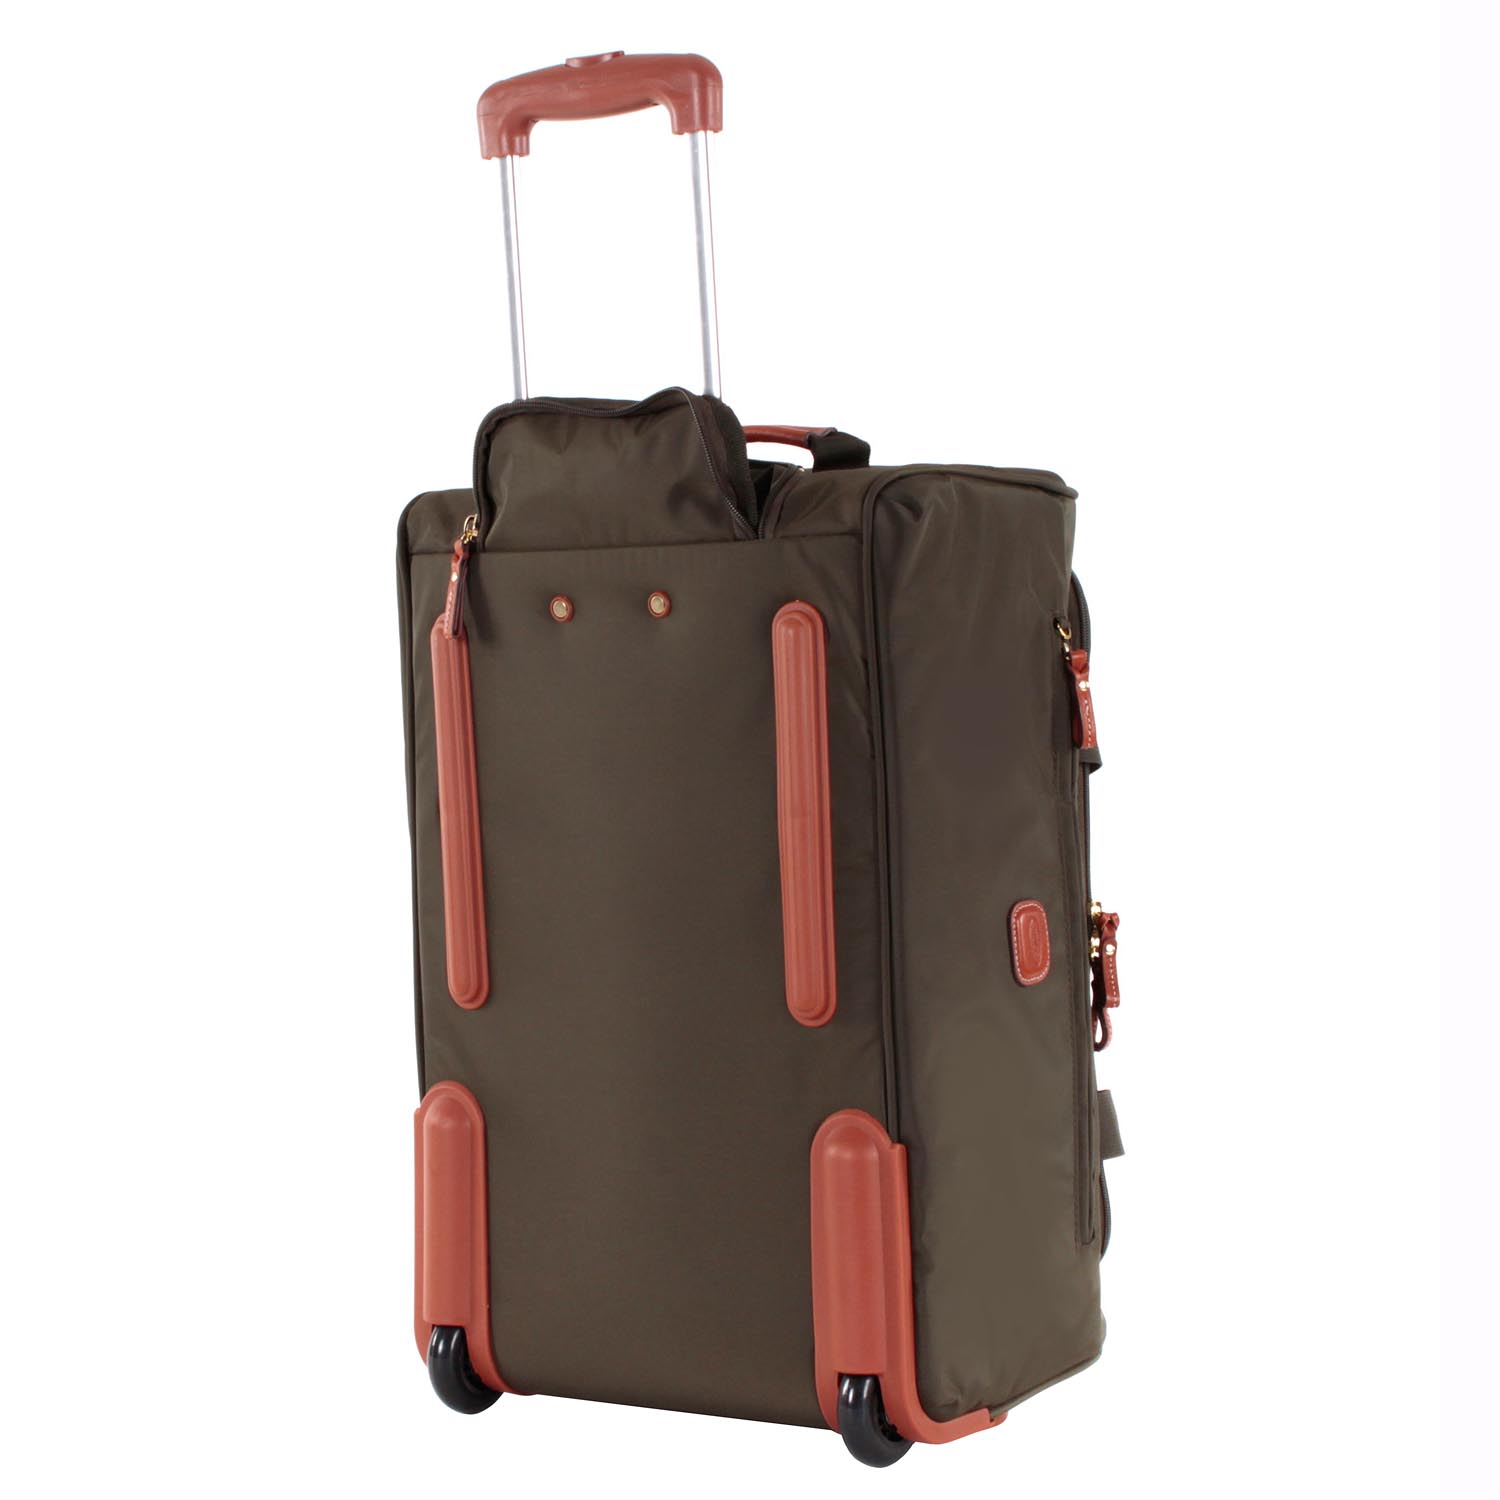 Bric's X-Bag 21" Carry-on Rolling Duffle Bag - Olive BXL32510.078